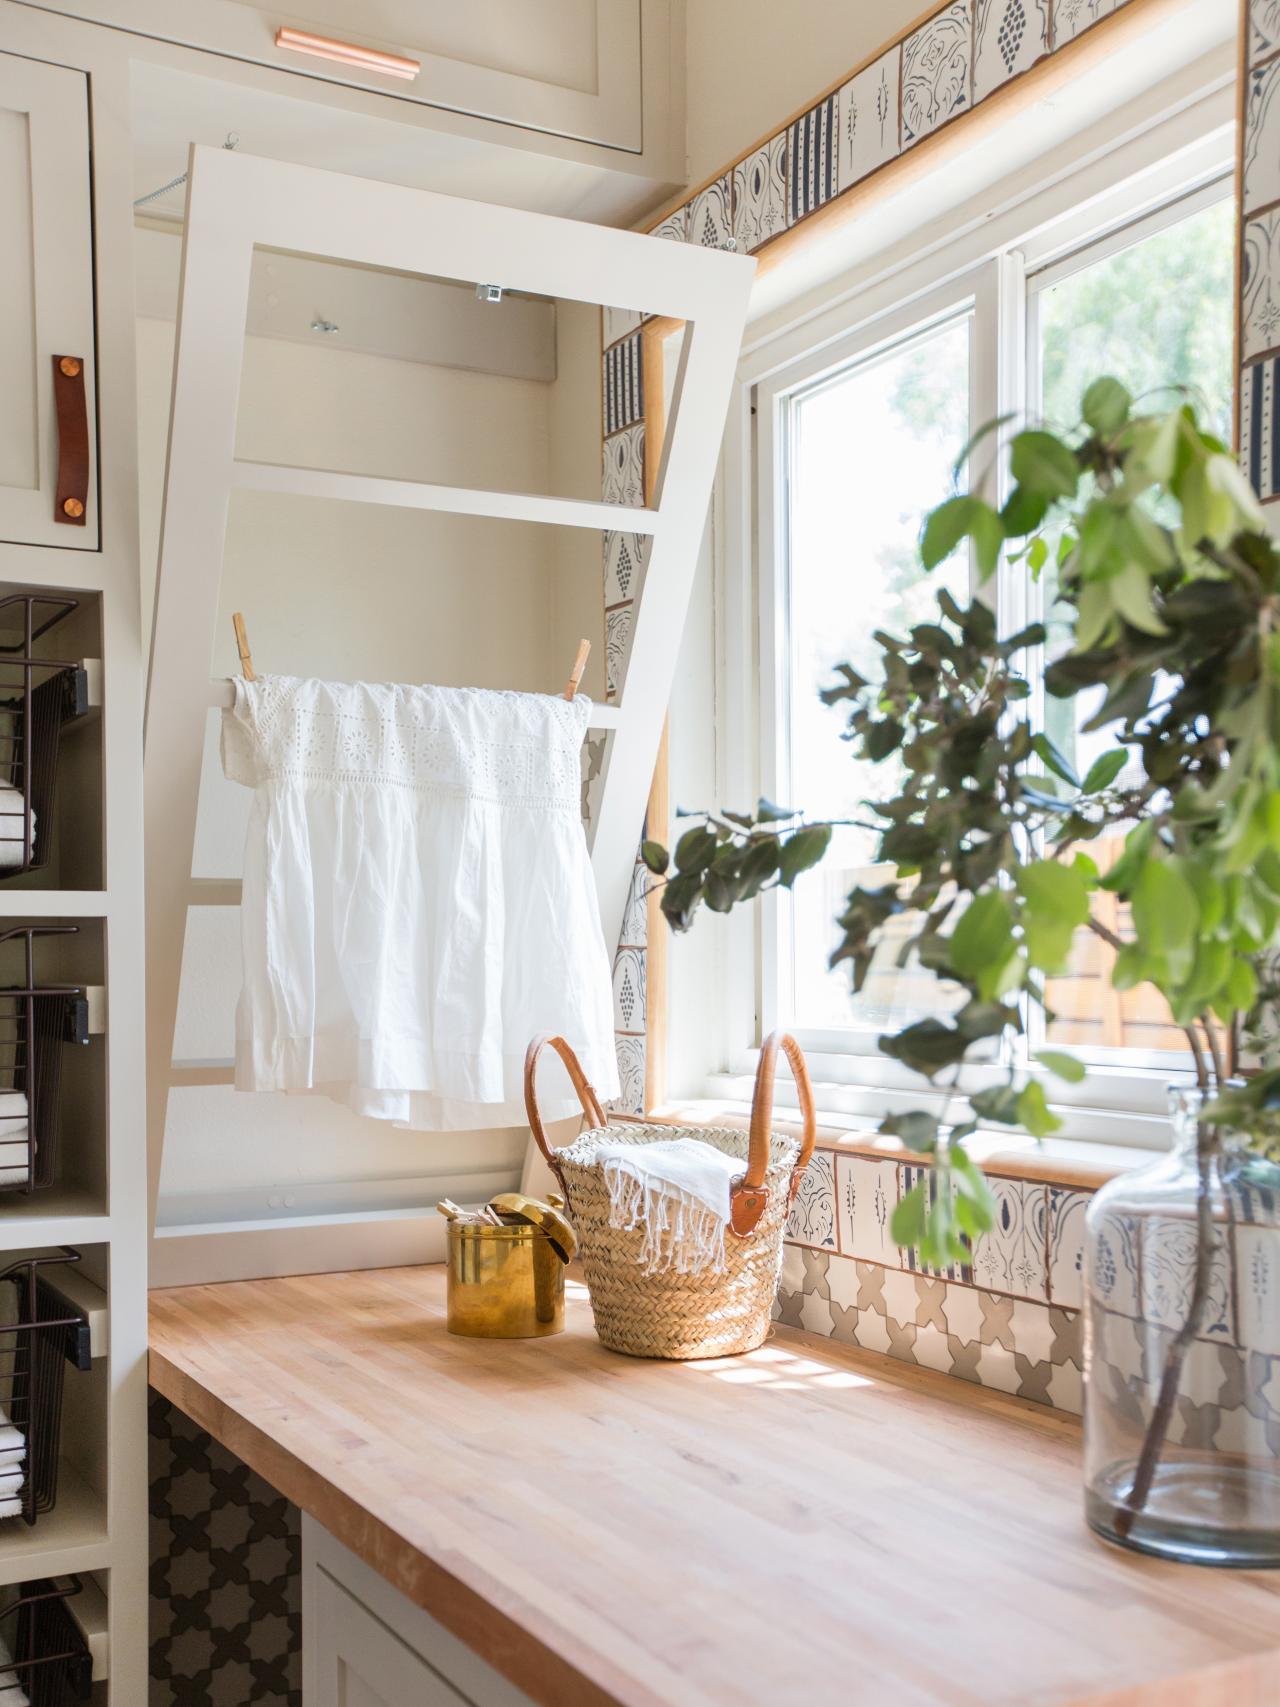 15 Ways to Organize Your Small Laundry Room